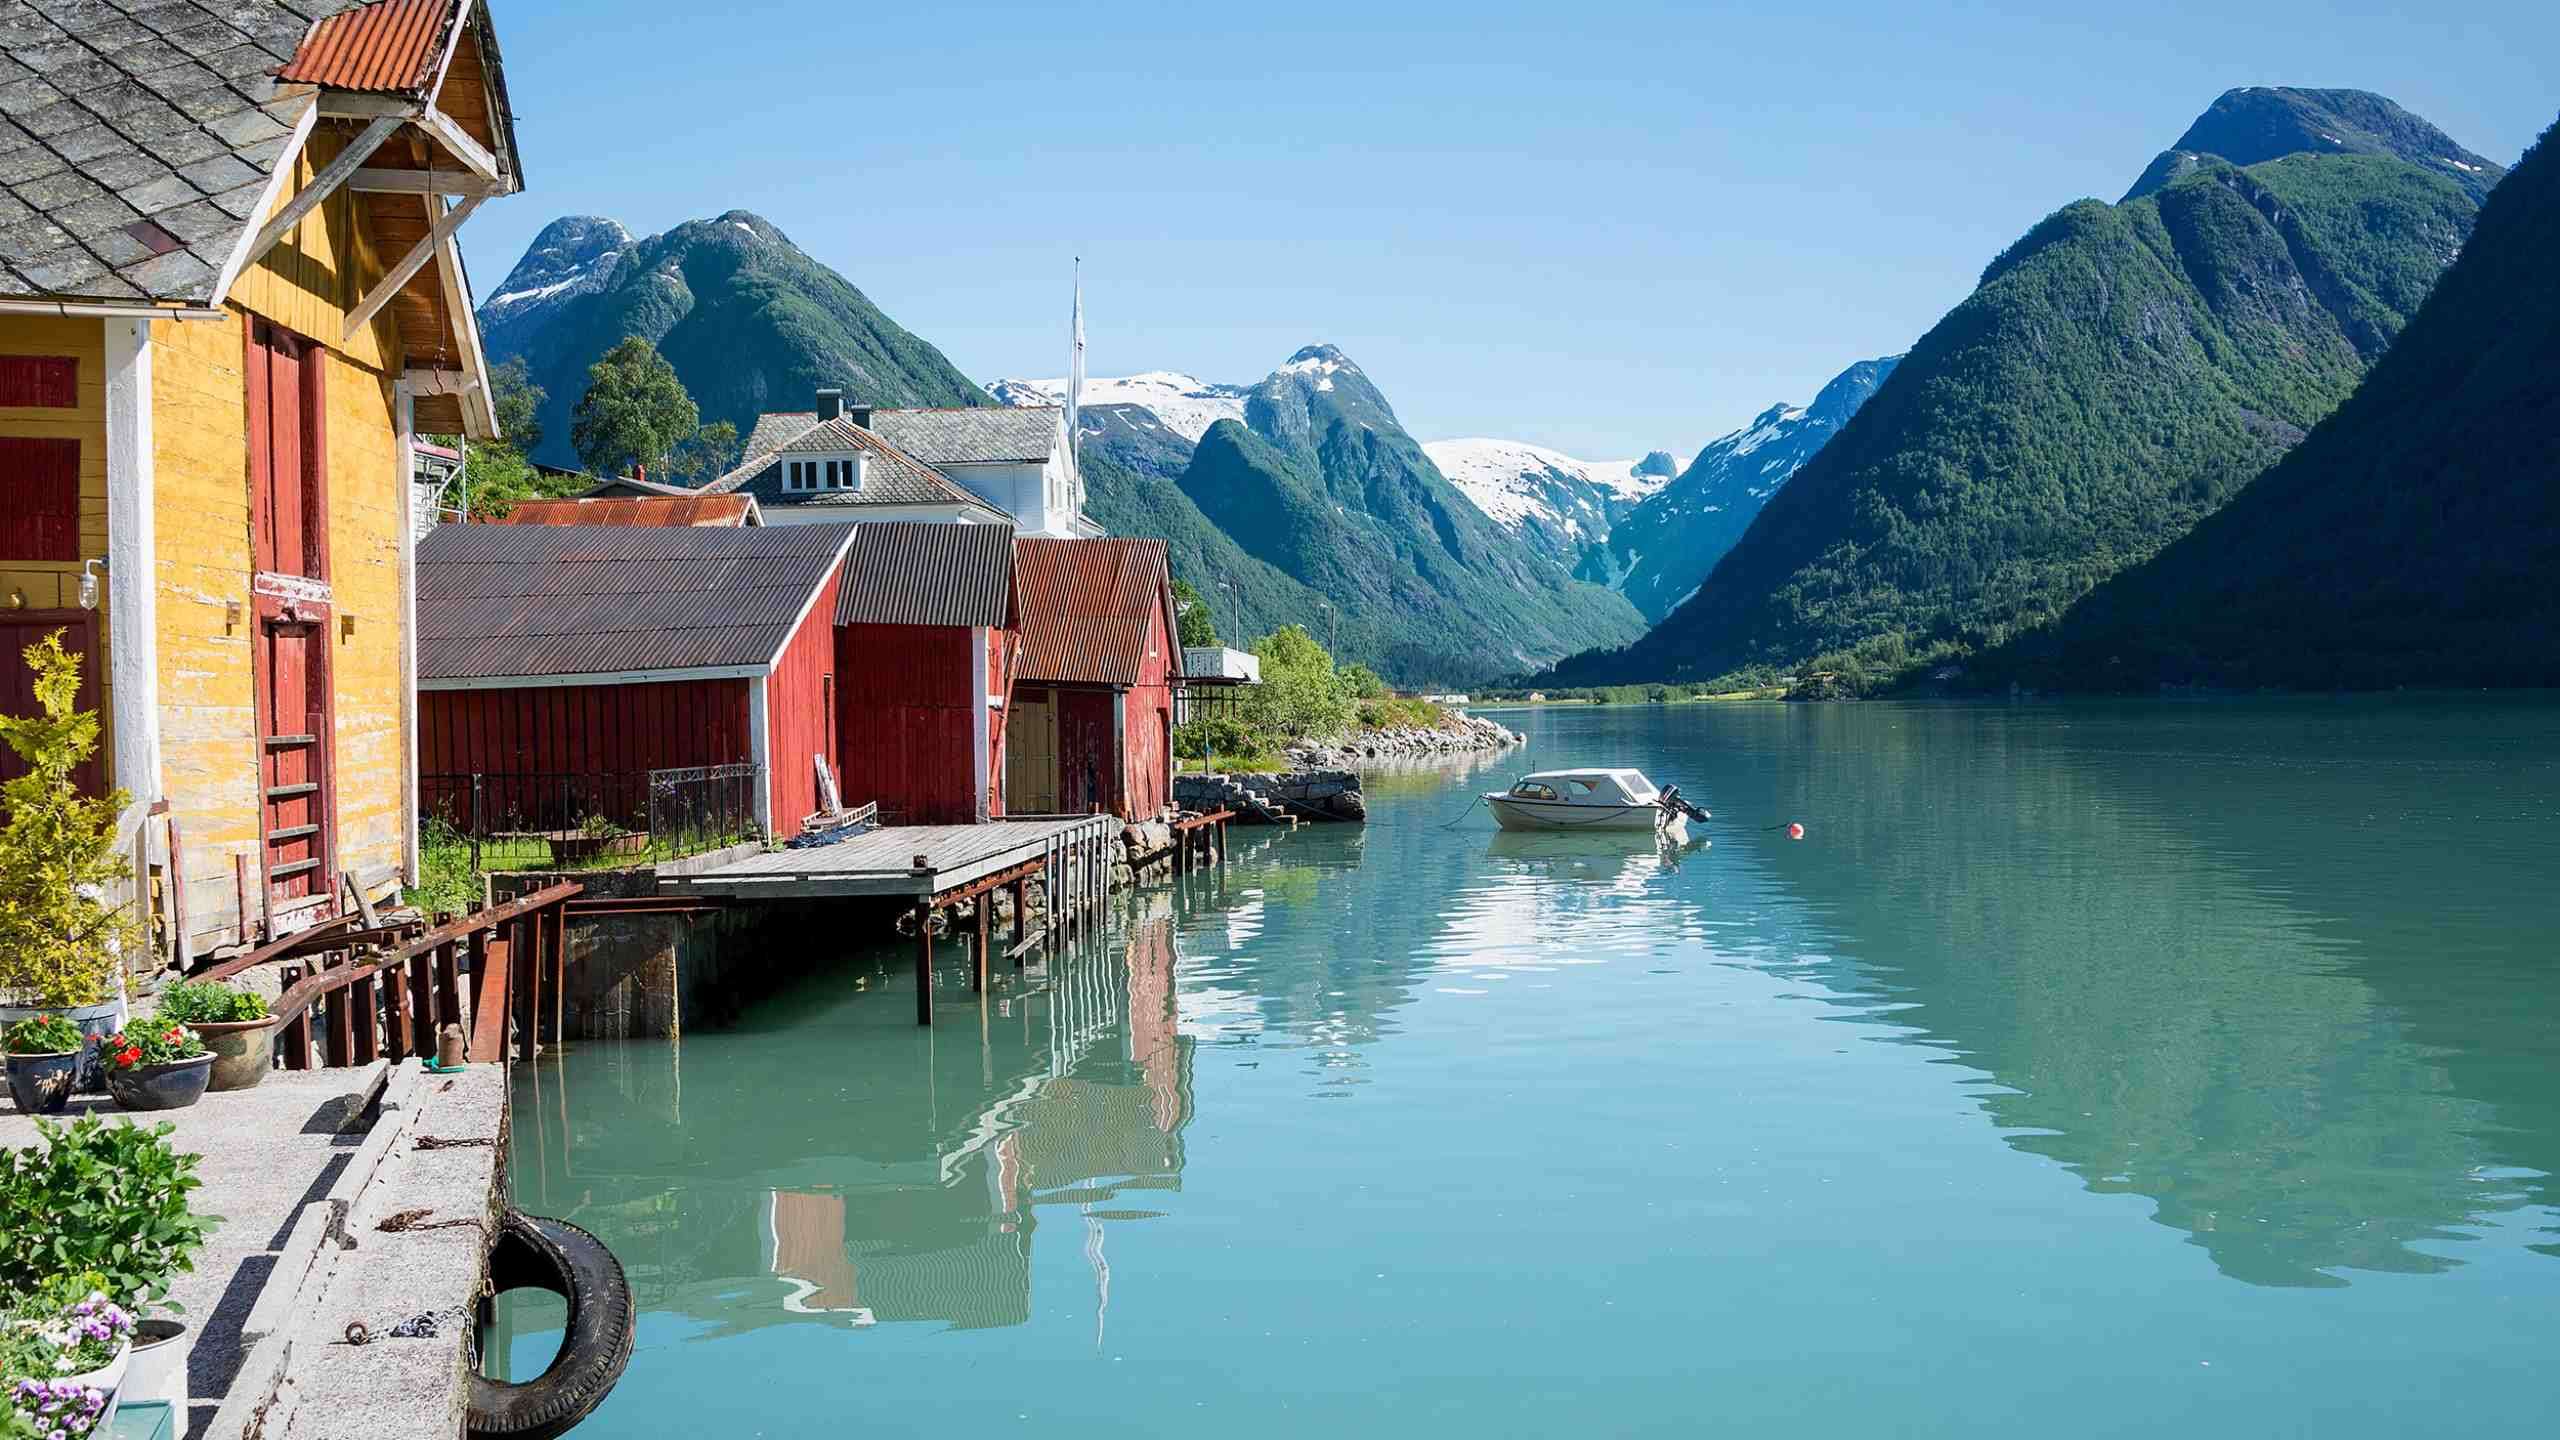 Norway Walk 6D5N (Fjords, Mountains & Glaciers North of Bergen), Fully Guided